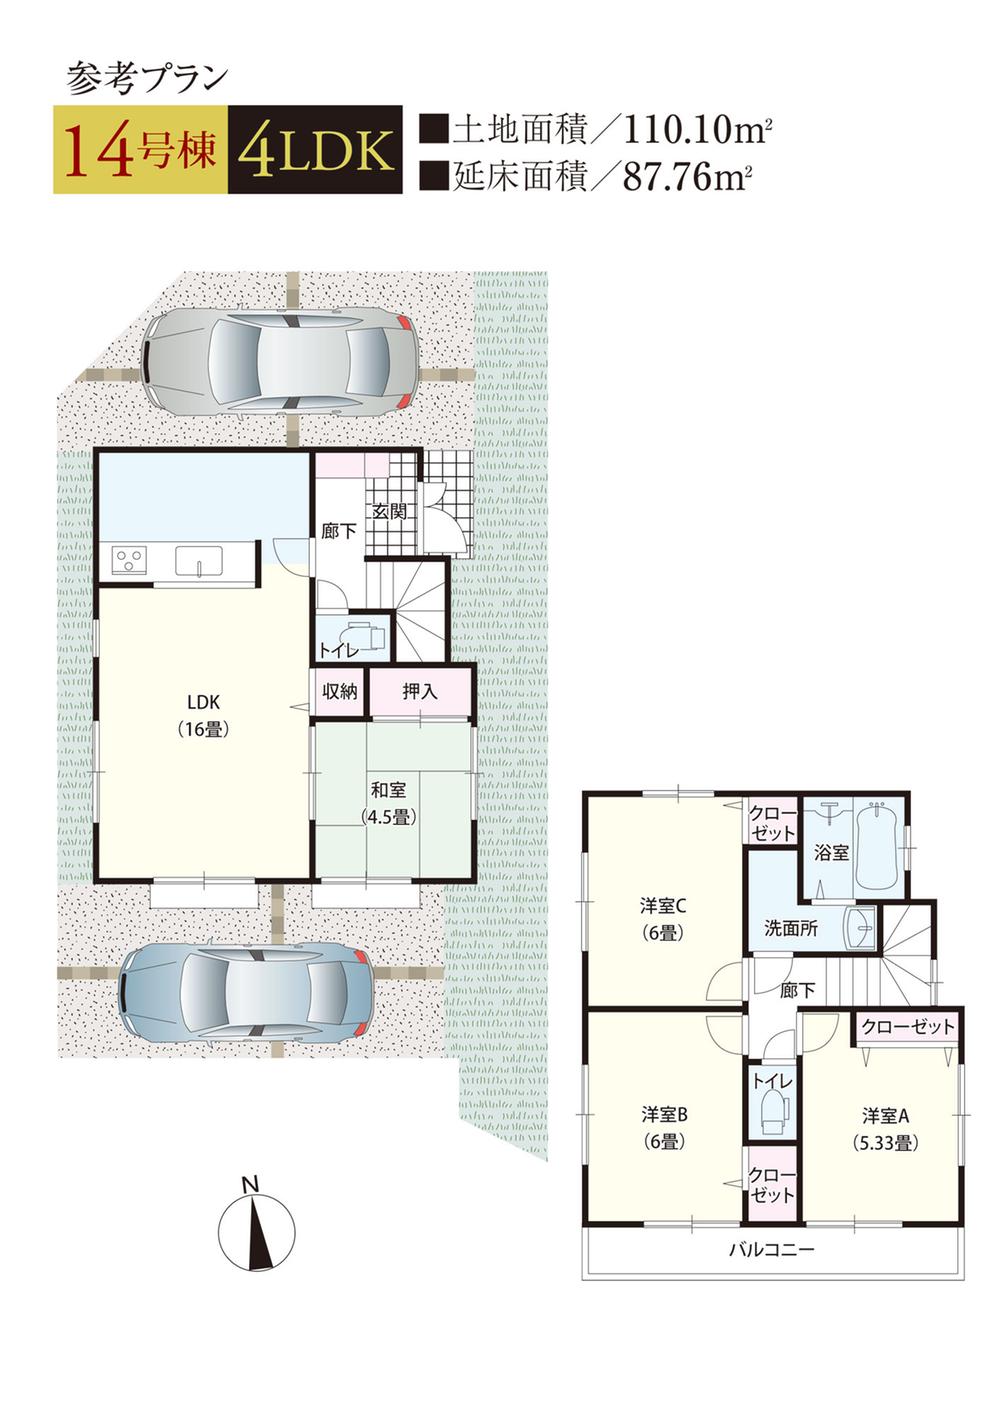 Other. Corner lot ・ South side open ・ Two car space ・ Japanese-style room Tsuzukiai plan